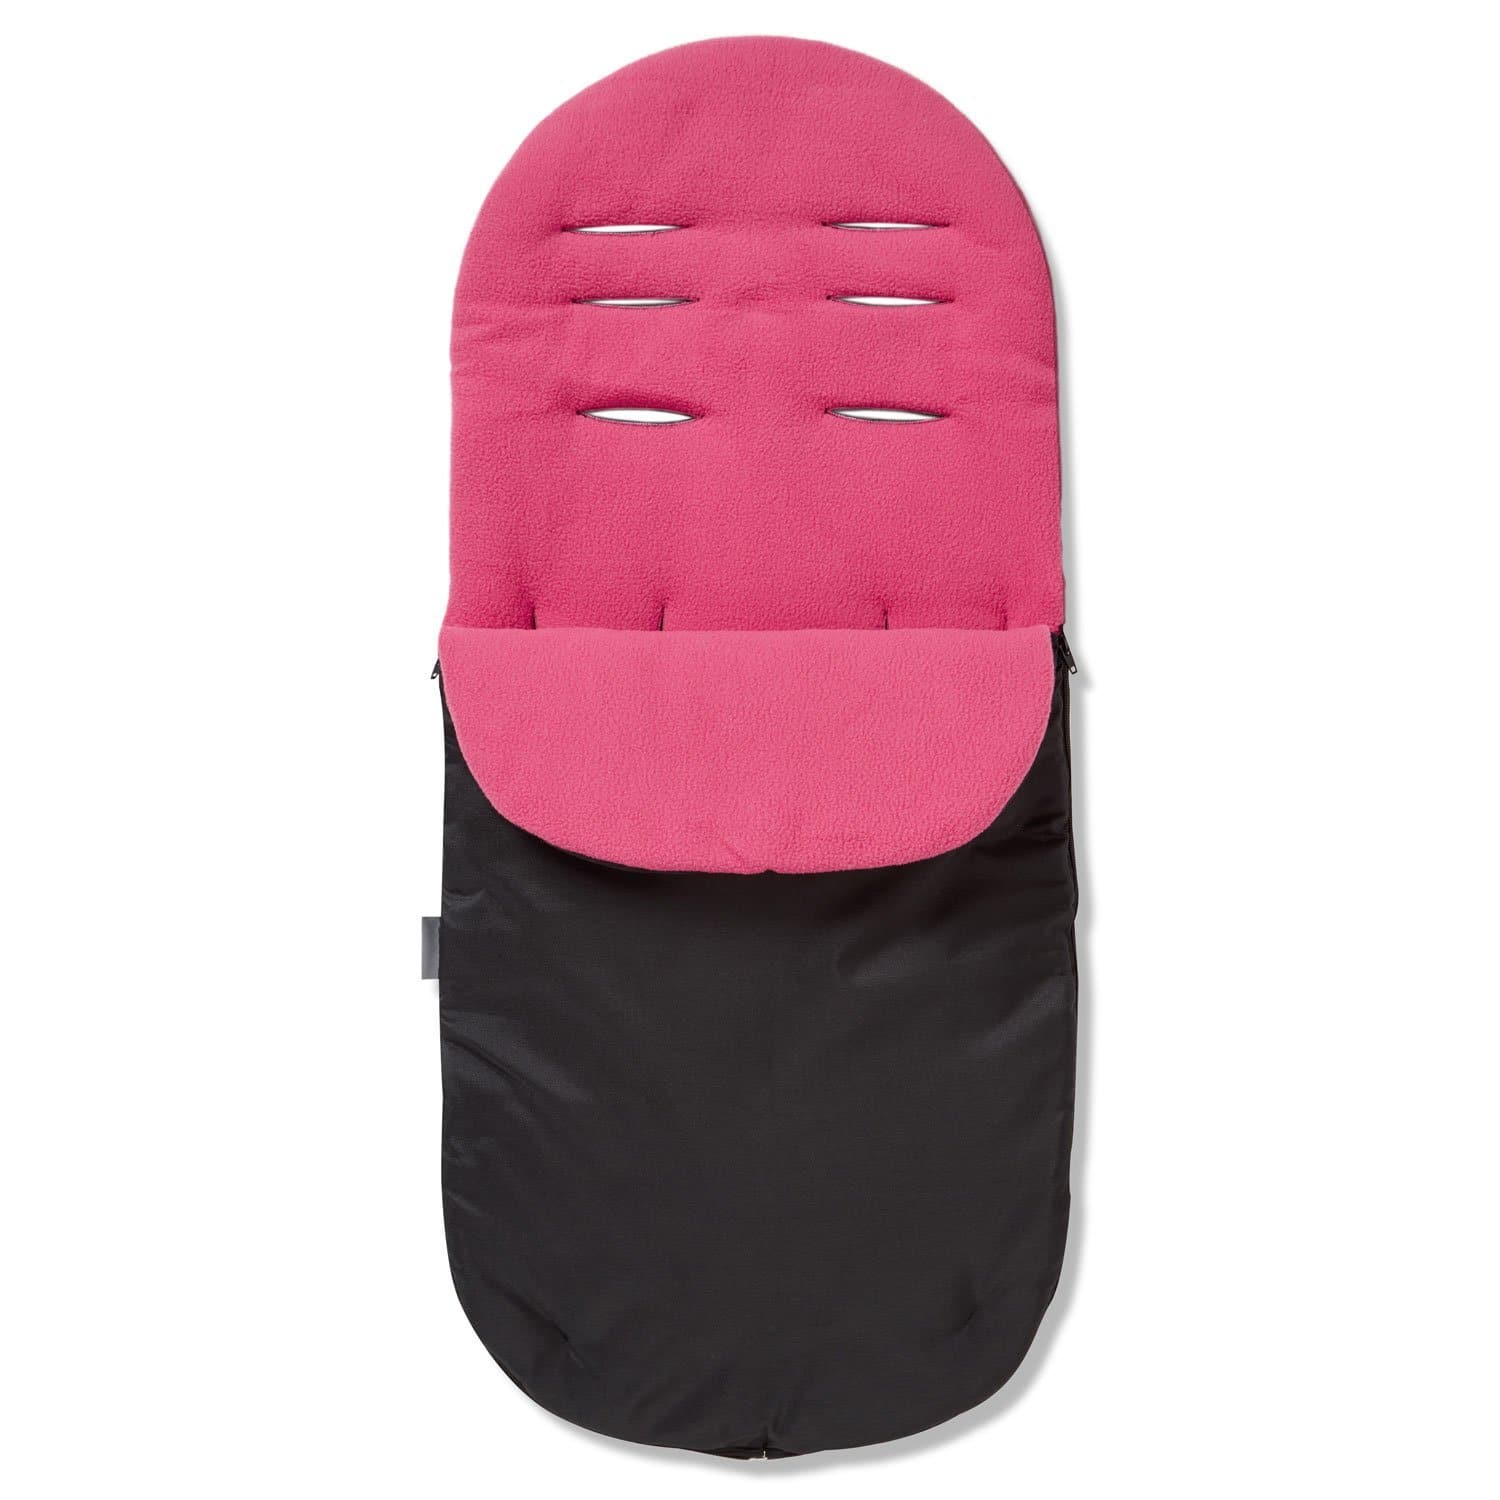 Footmuff / Cosy Toes Compatible with Quinny - Dark Pink / Fits All Models | For Your Little One